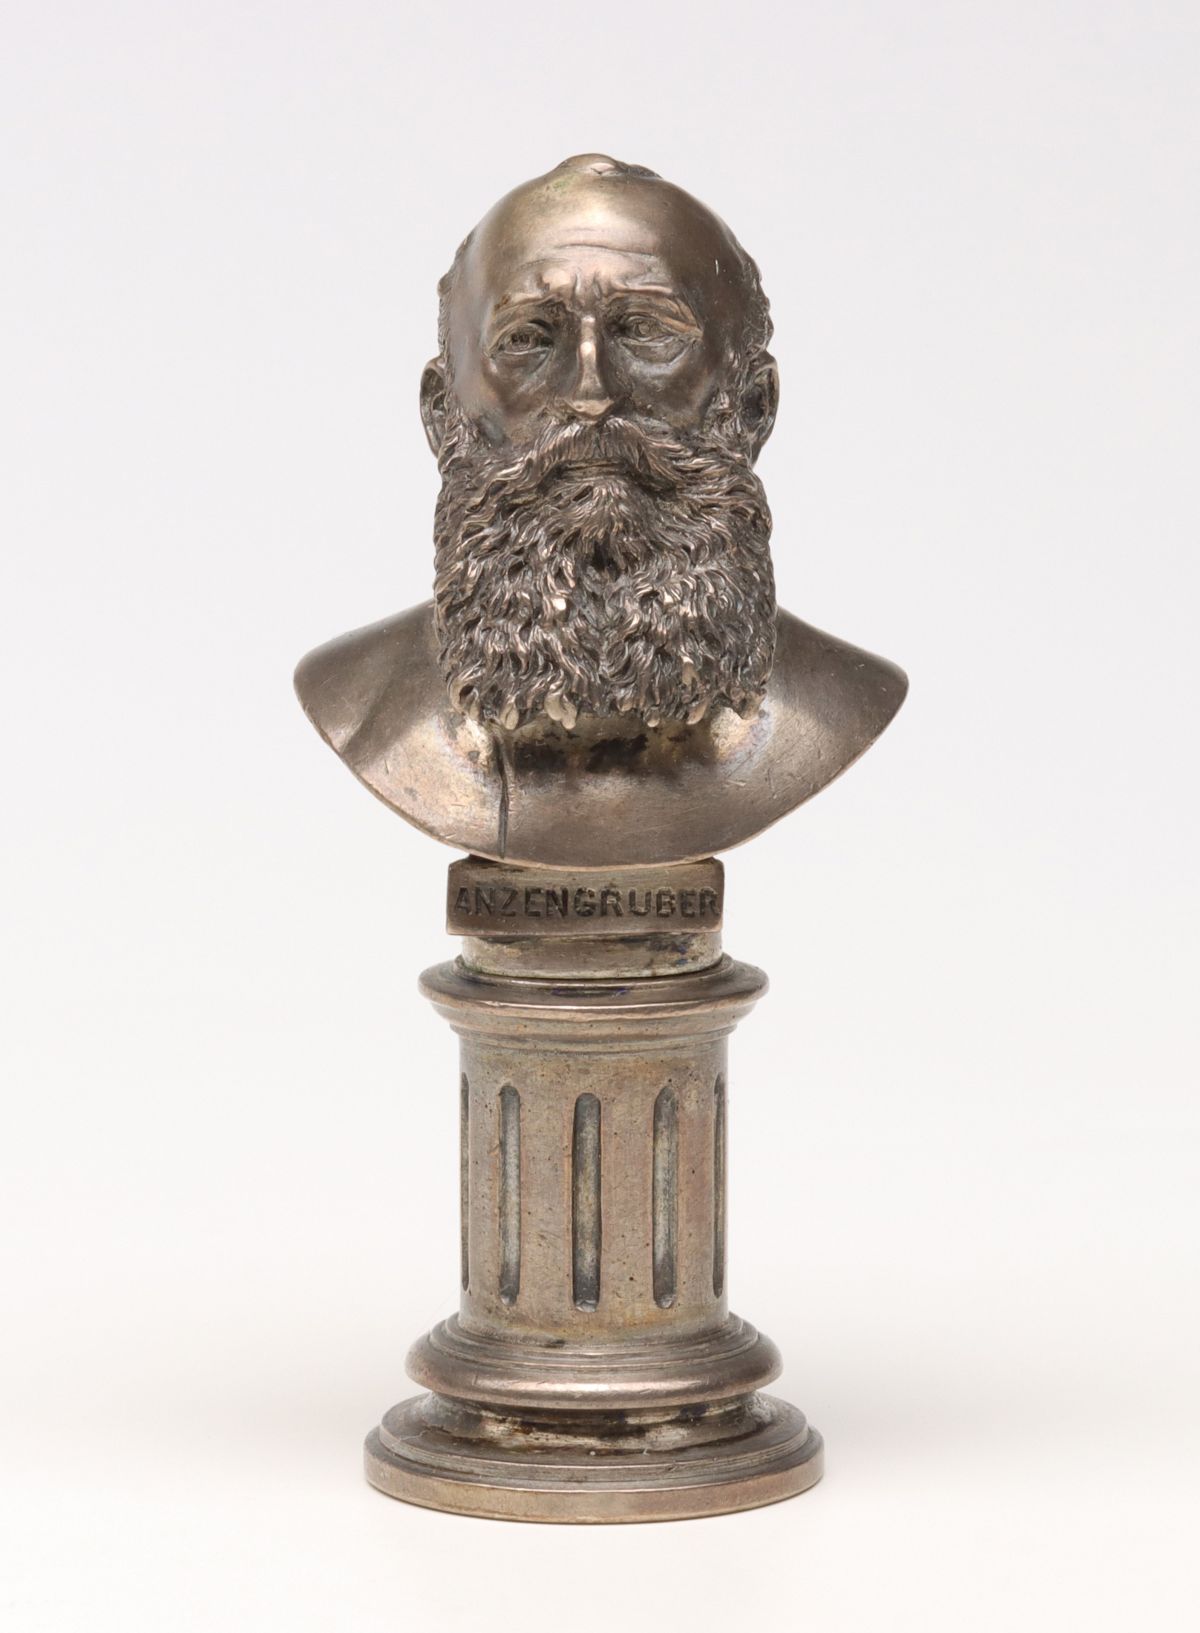 SILVER PLATED BUST OF ANZENGRUBER ON ANTIQUE WAX SEAL